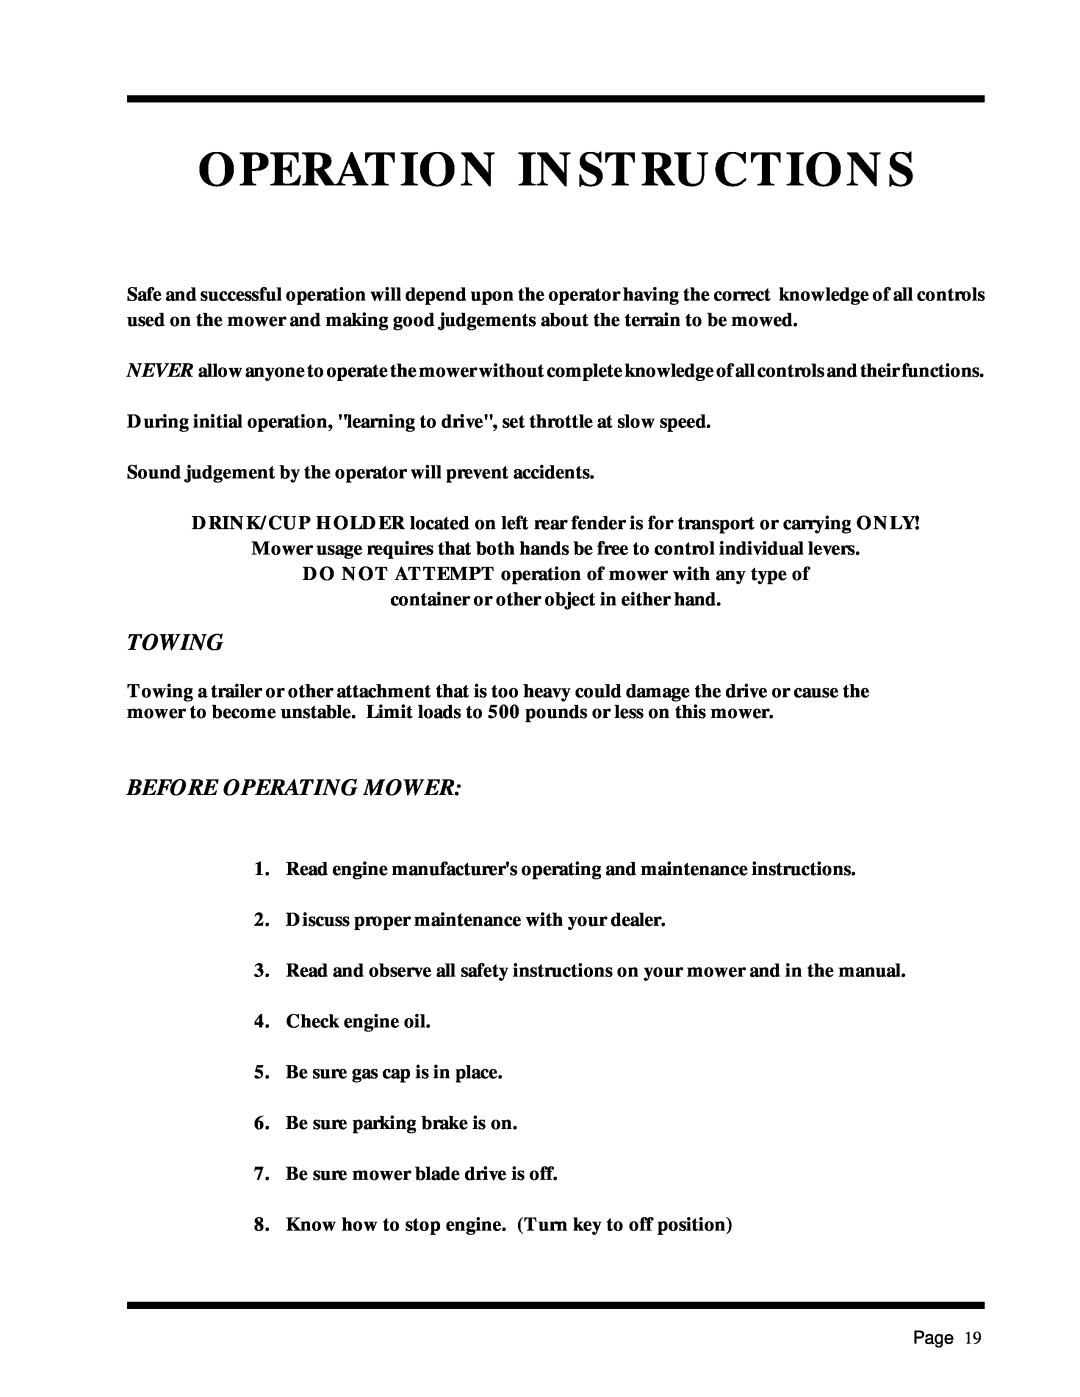 Dixon ZTR 5017Twin manual Operation Instructions, Towing, Before Operating Mower 